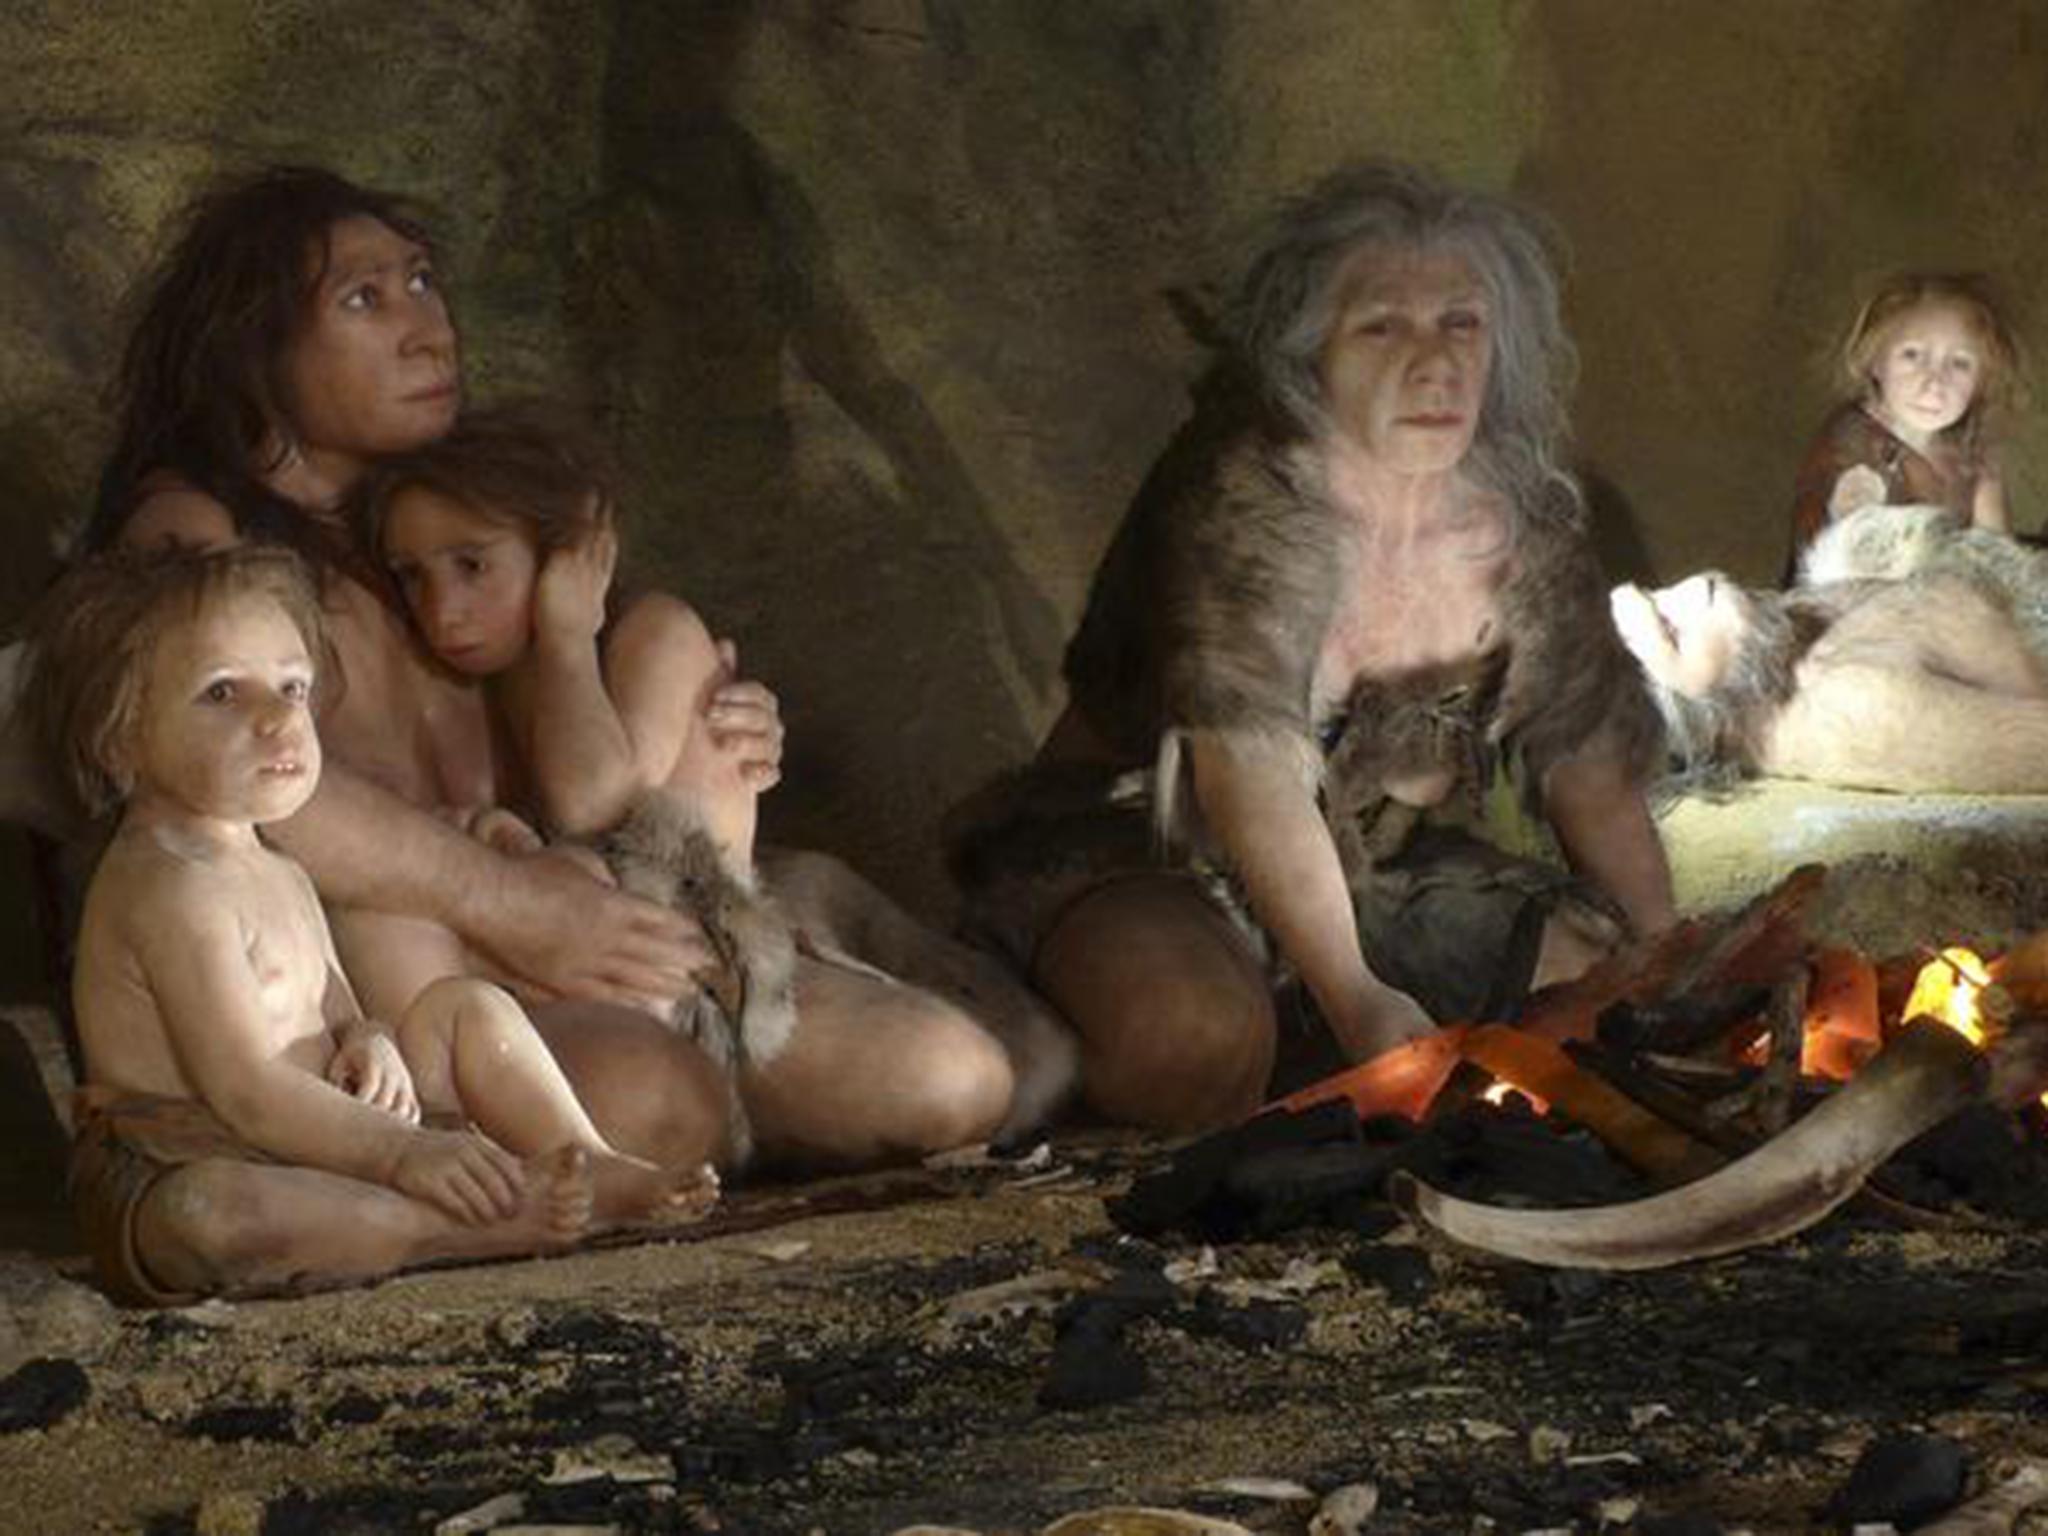 Current research suggest Neanderthals (artist's impression) went extinct over a period of 4,000 to 10,000 years